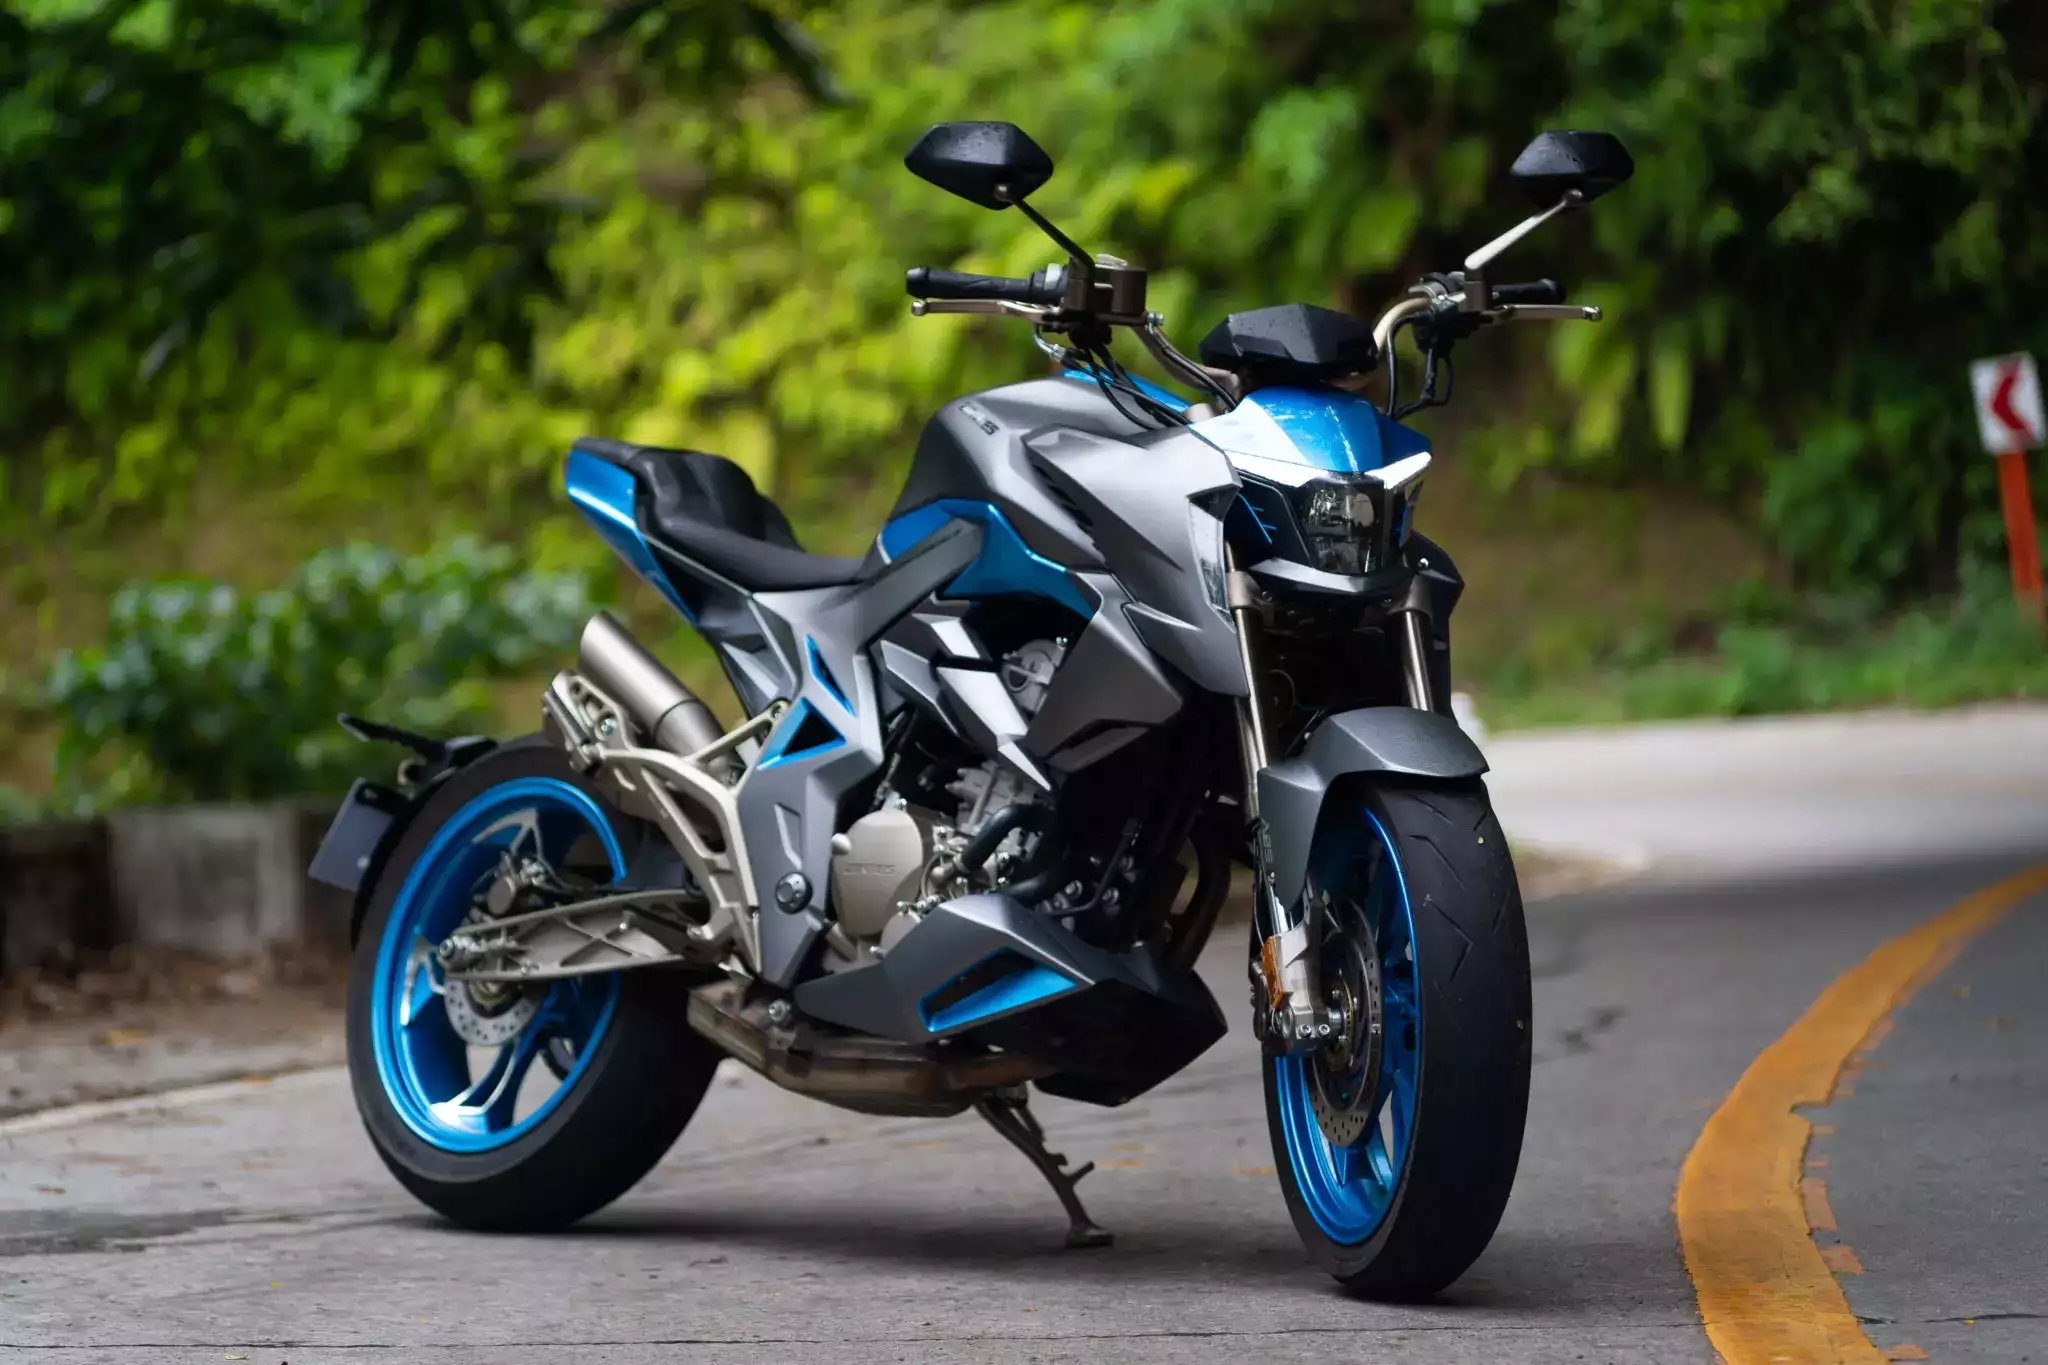 New Zontes Motorcycles Launched in India, Price starts at 3.15 Lakh news